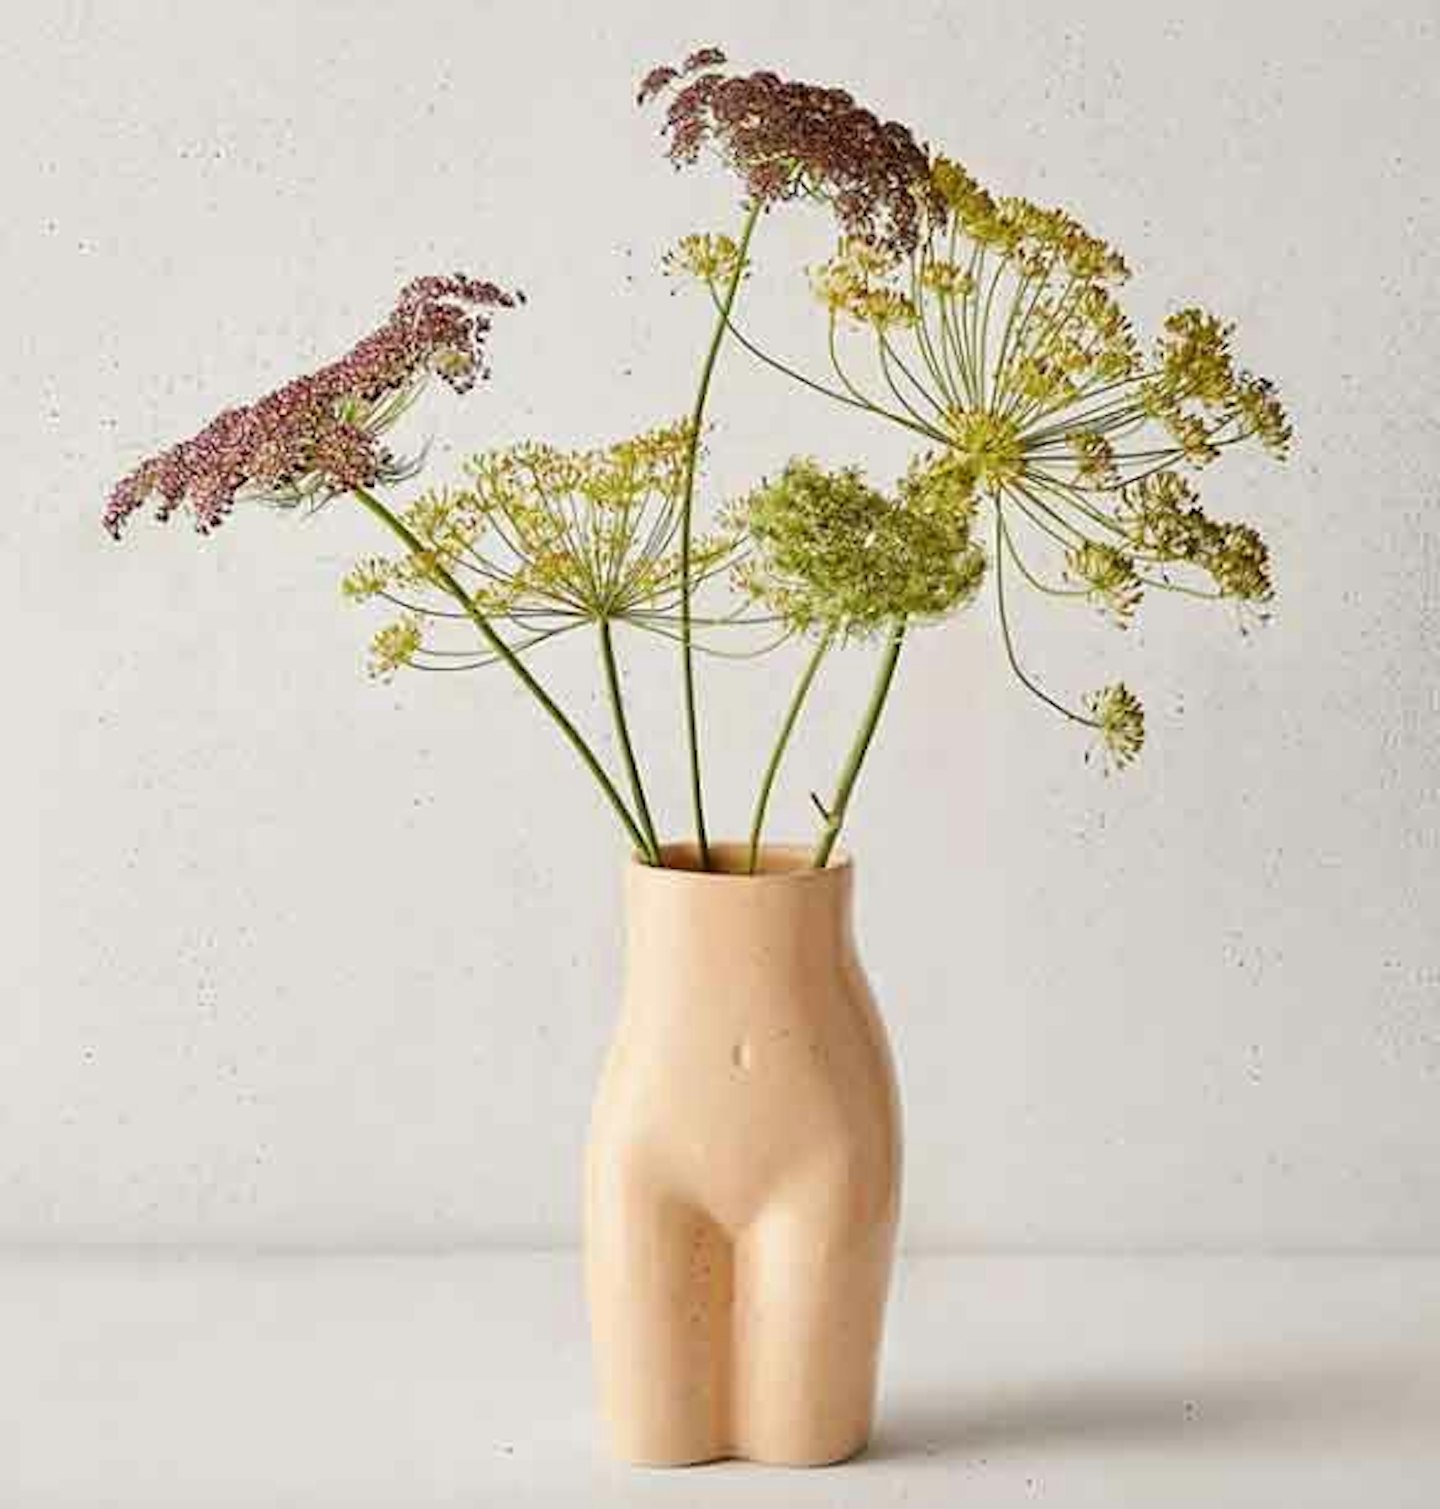 Urban Outfitters Female Form Vase